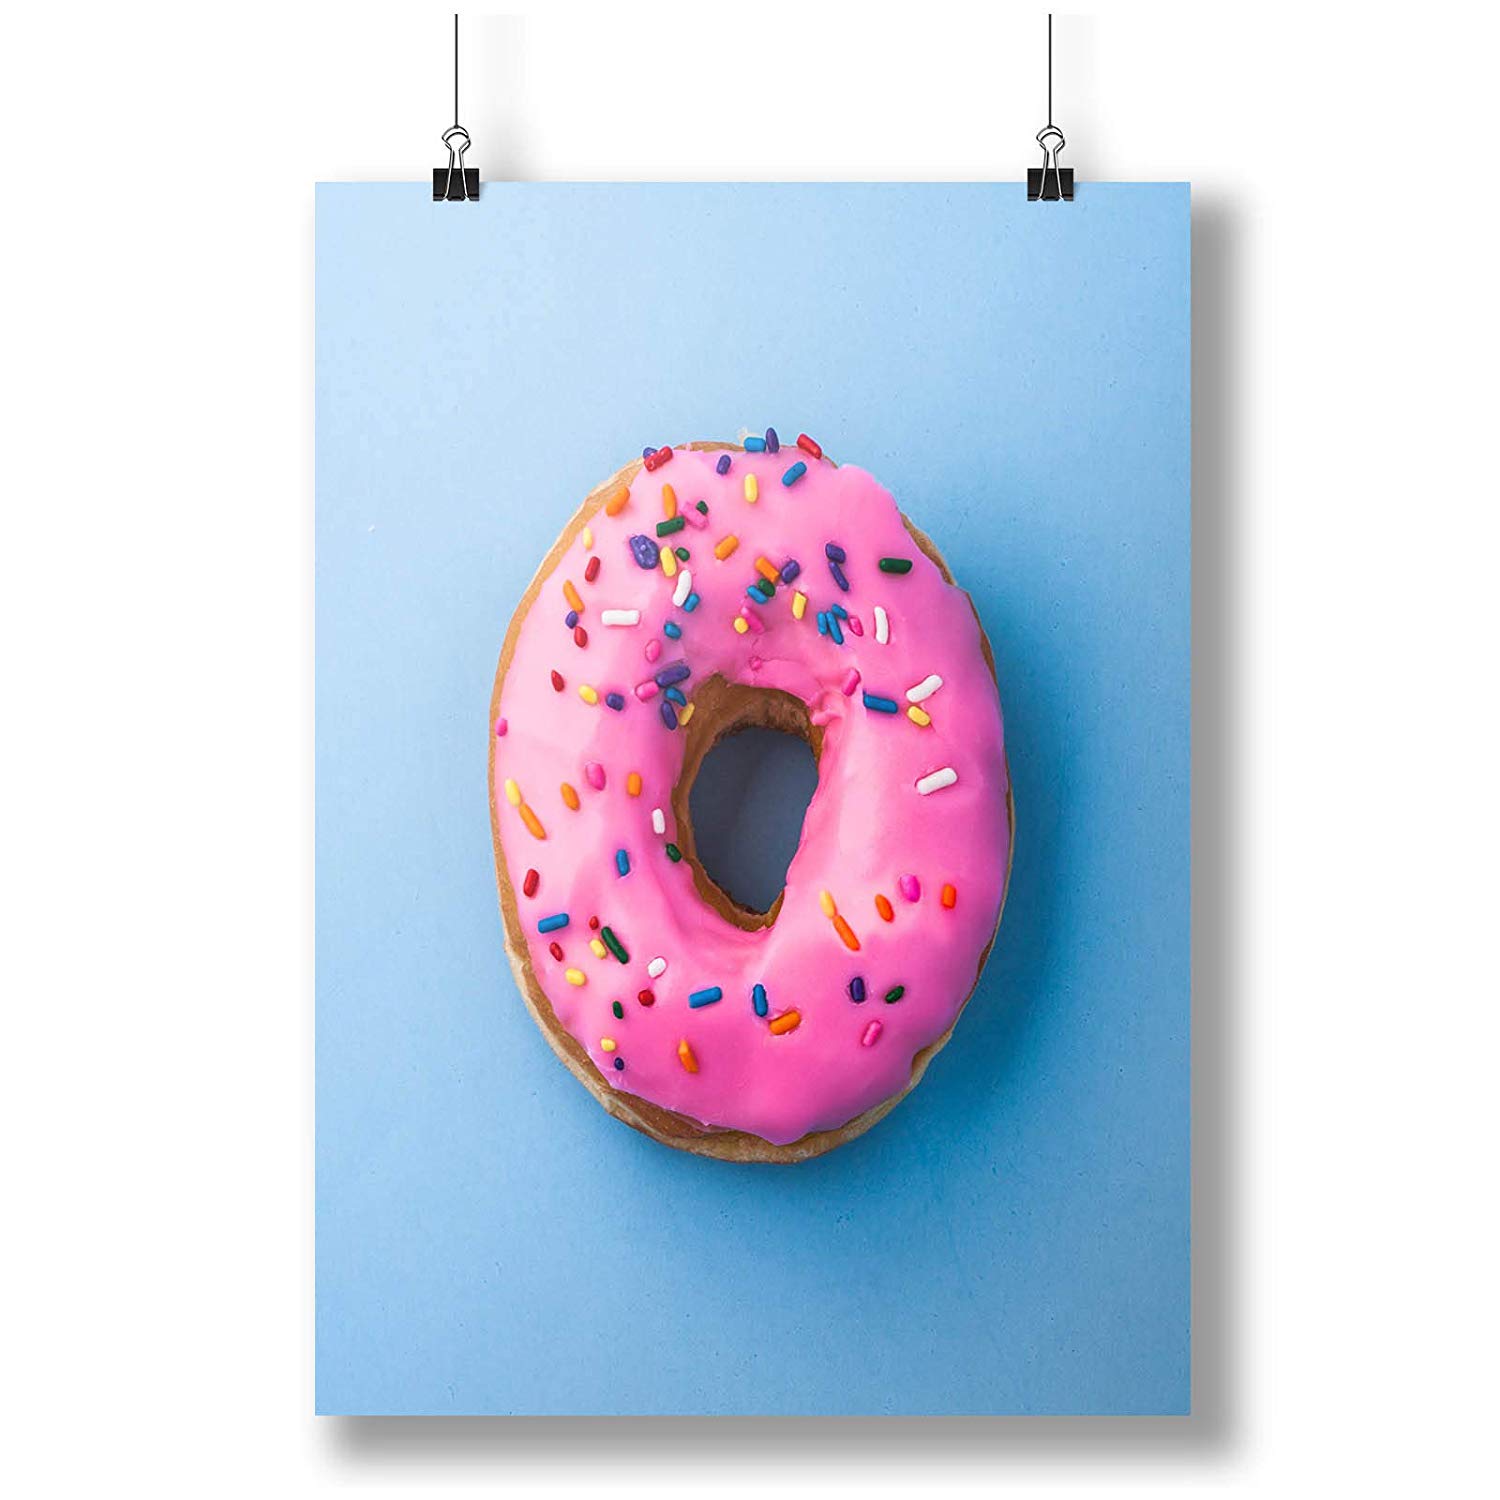 Amazon Innoglen Donut With Pnk Topping On A Blue Background